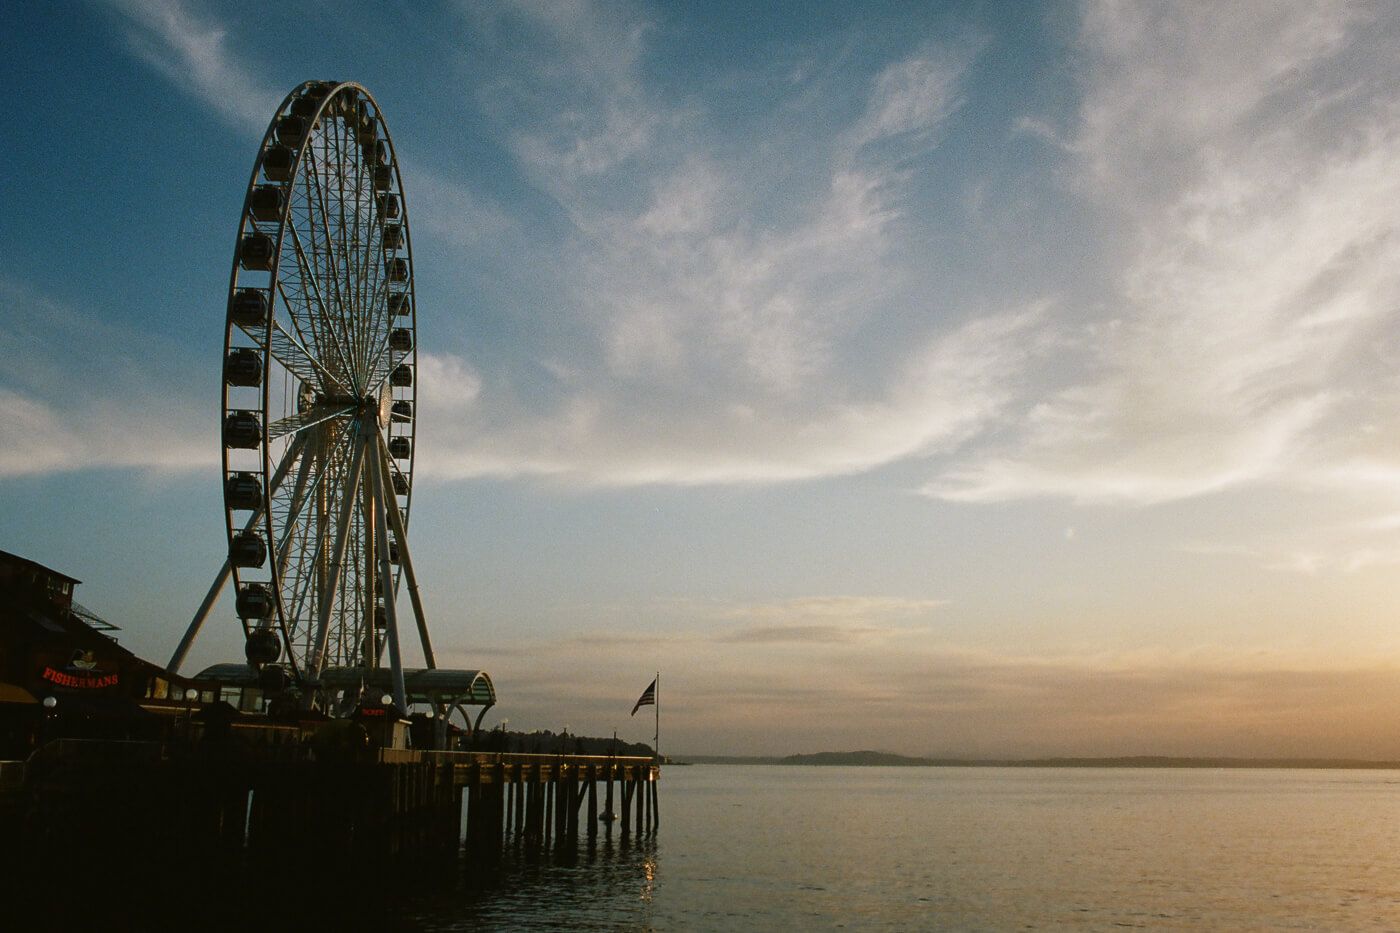 Ferris wheel on the pier beside the water, viewed from a distance